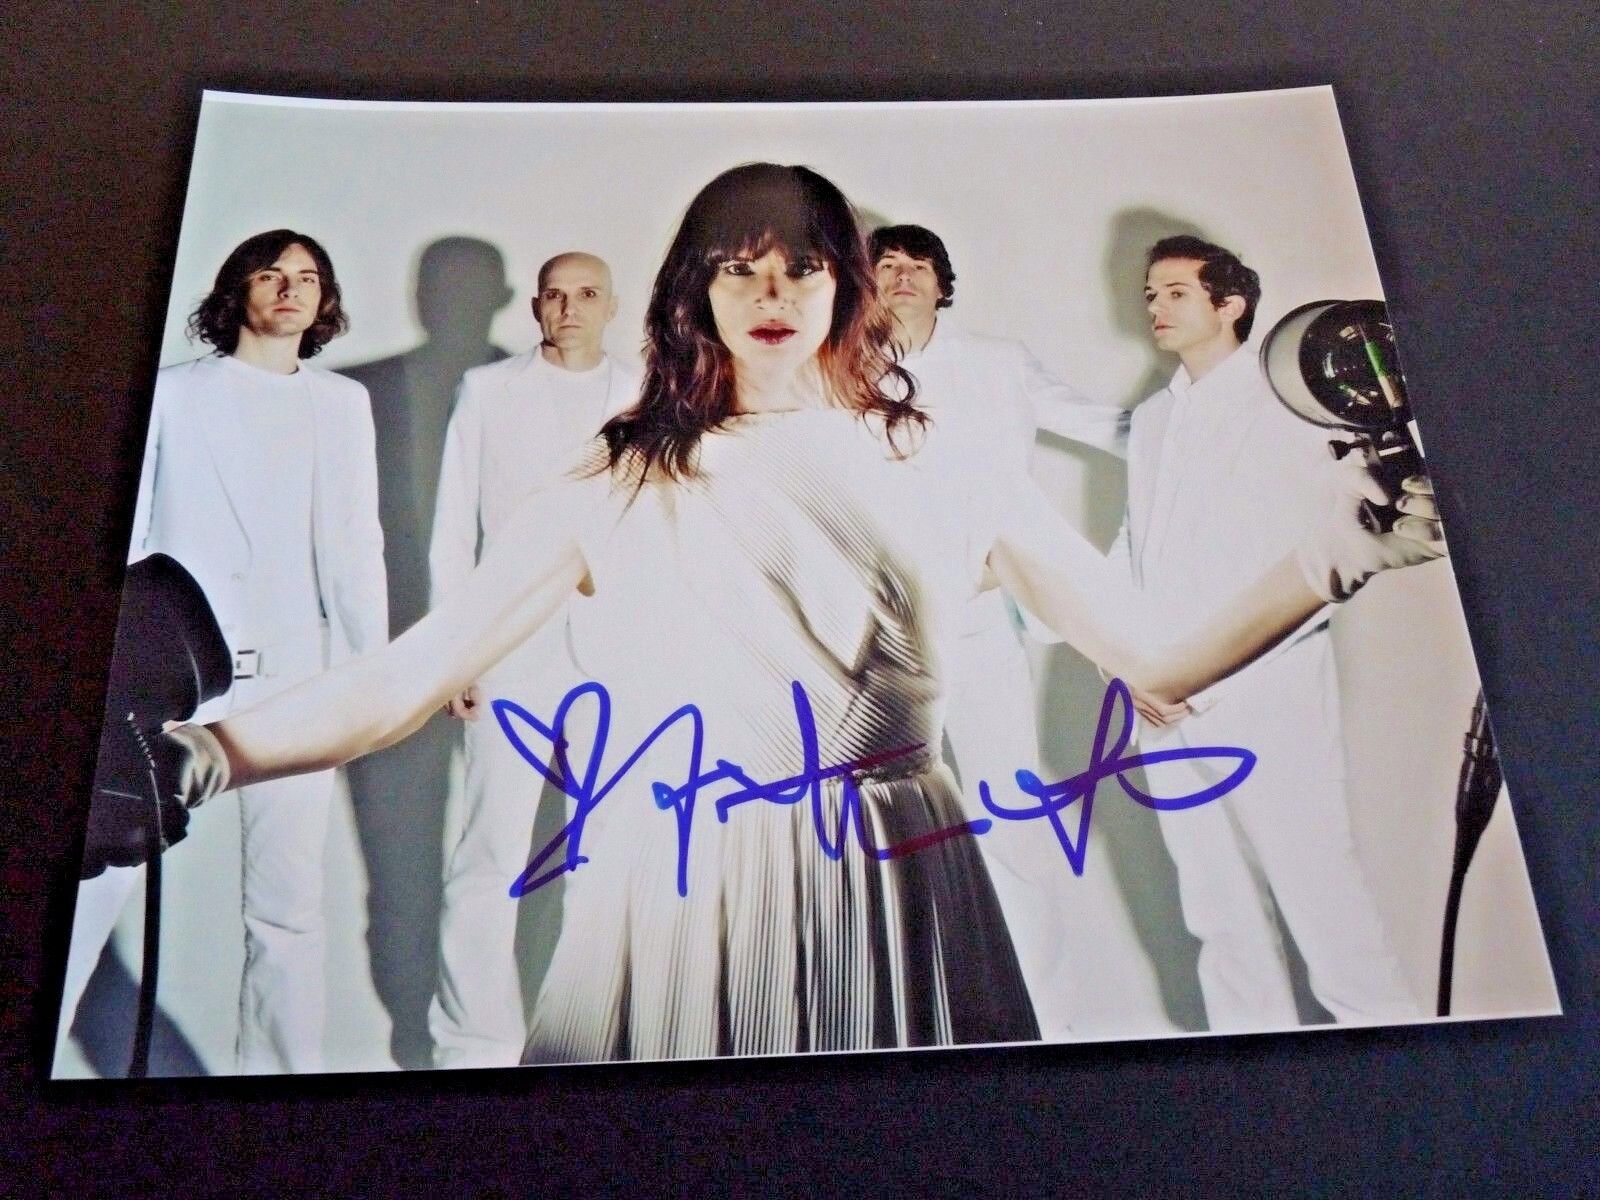 Juliette Lewis & The Licks Signed Autographed 8x10 Photo Poster painting PSA Beckett Guaranteed